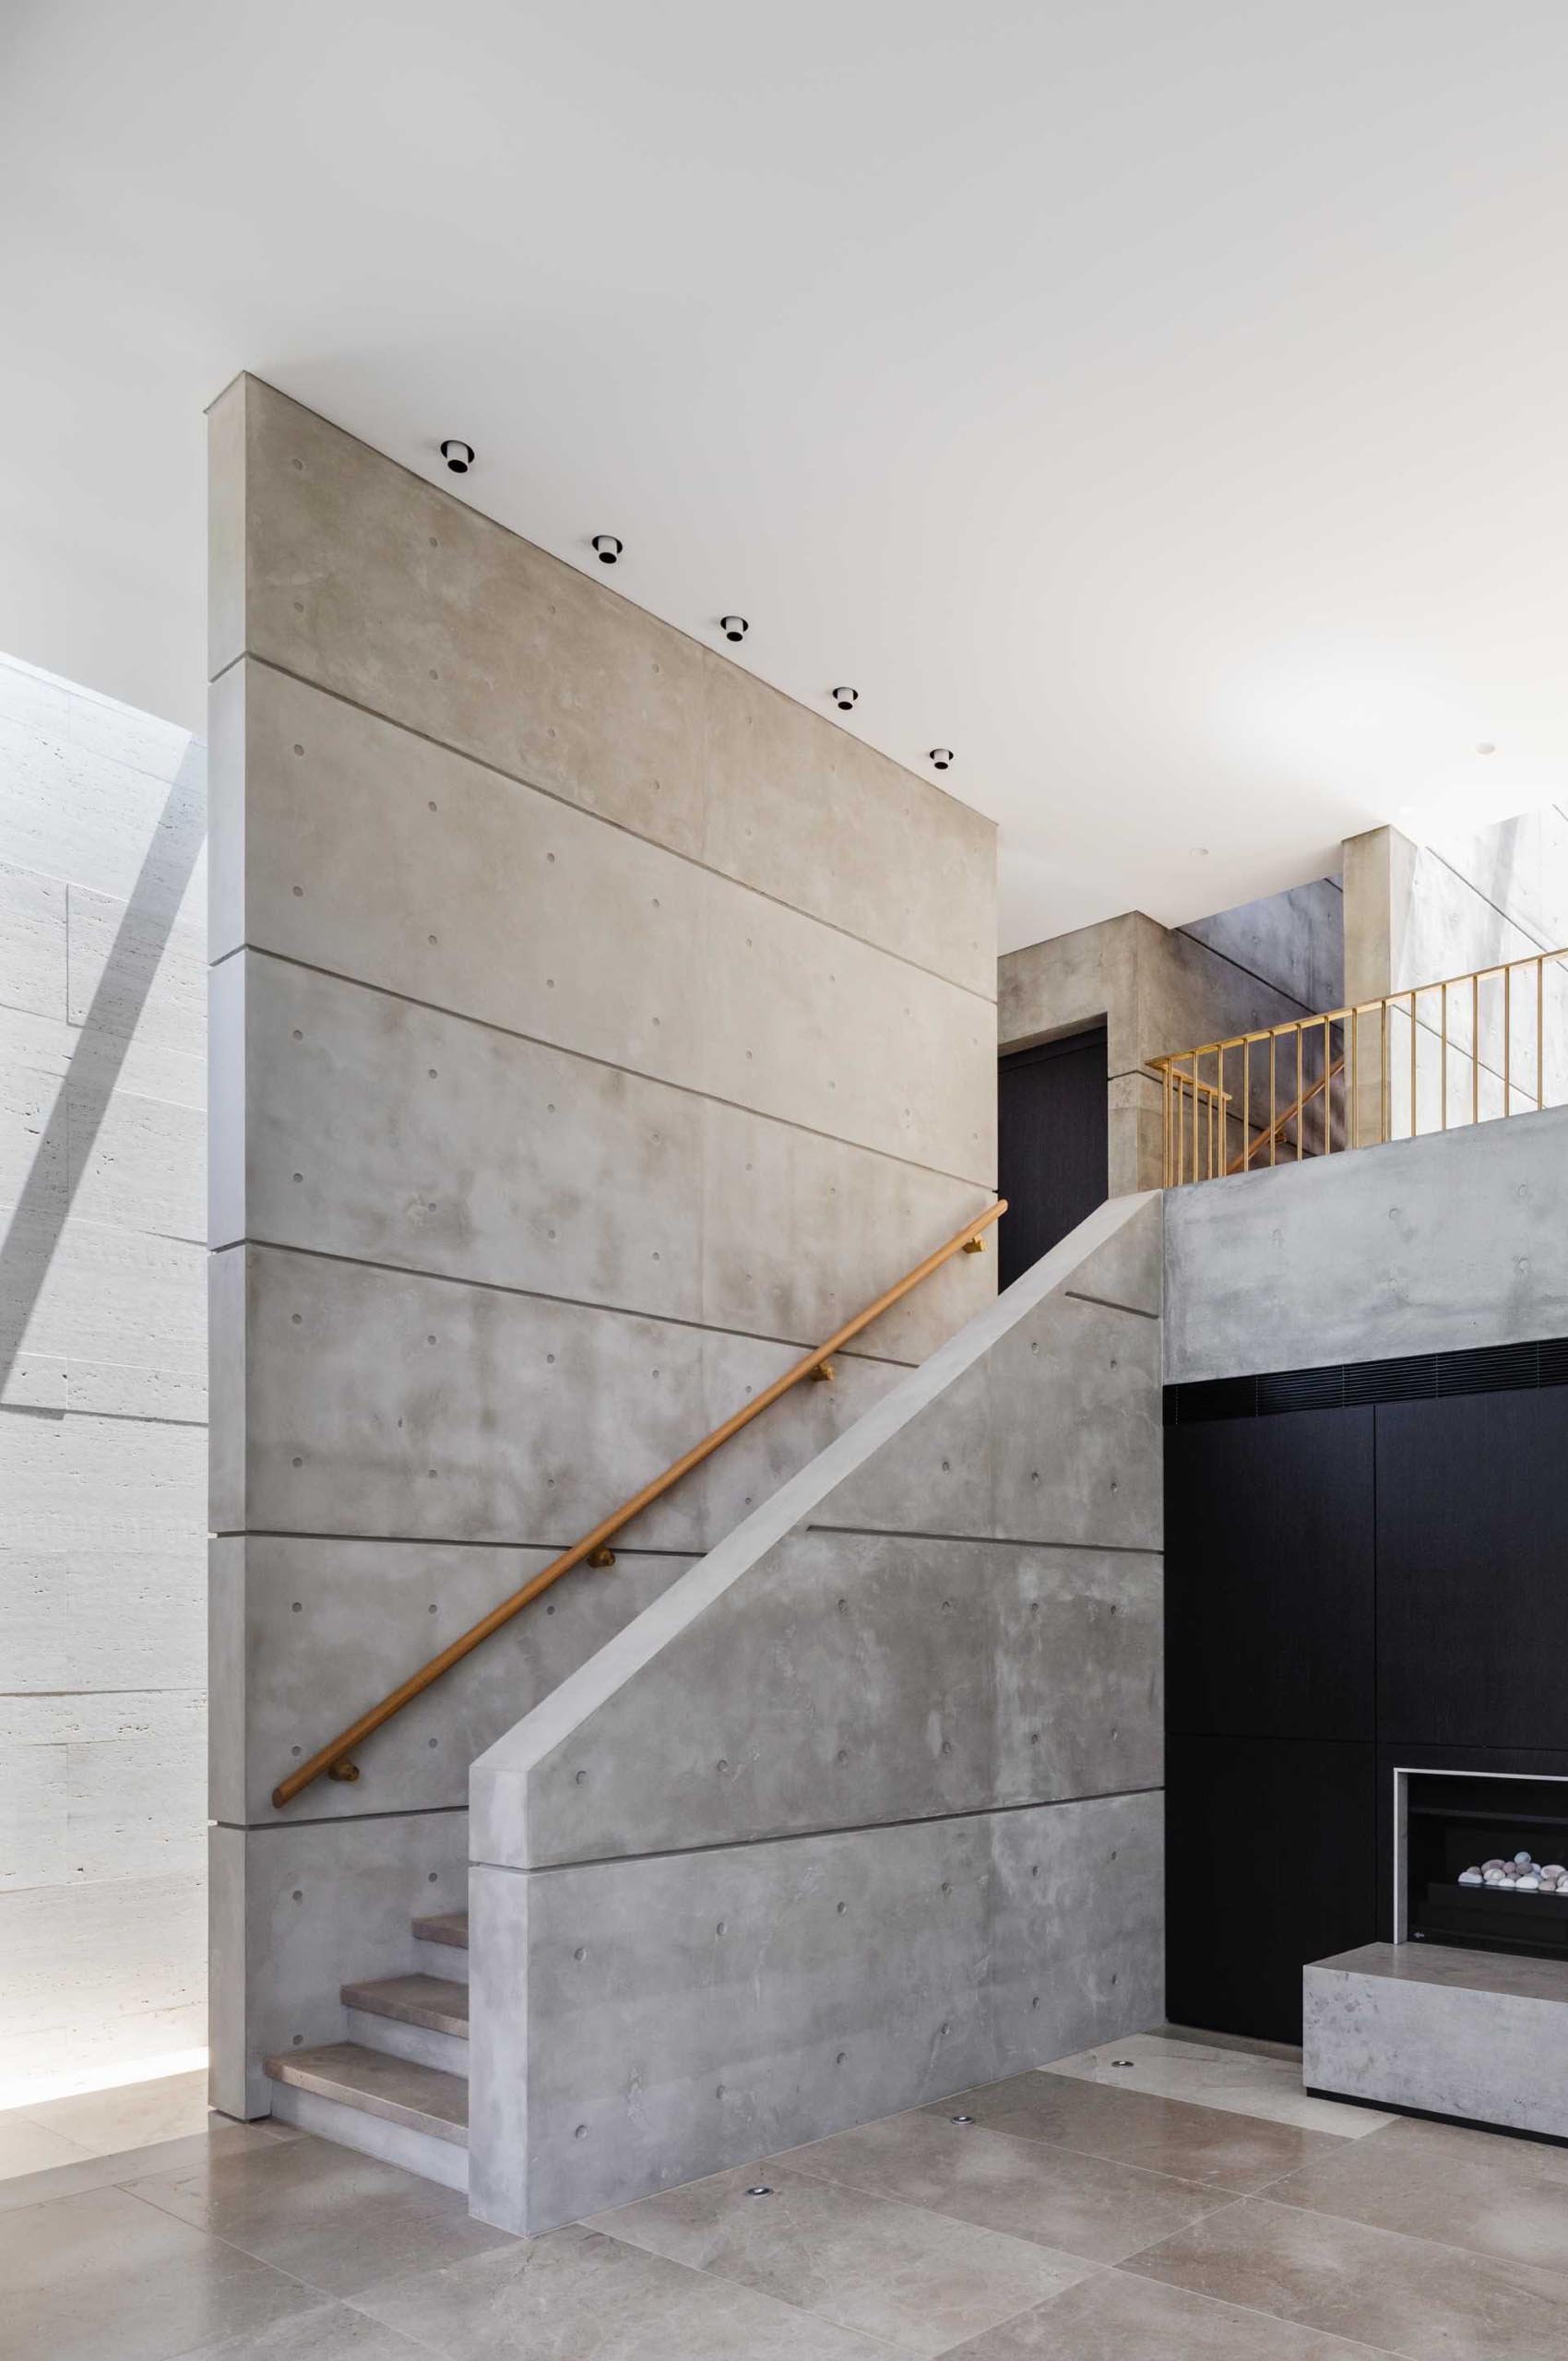 A modern home with concrete walls, limestone tiled floors, and a wood handrail.